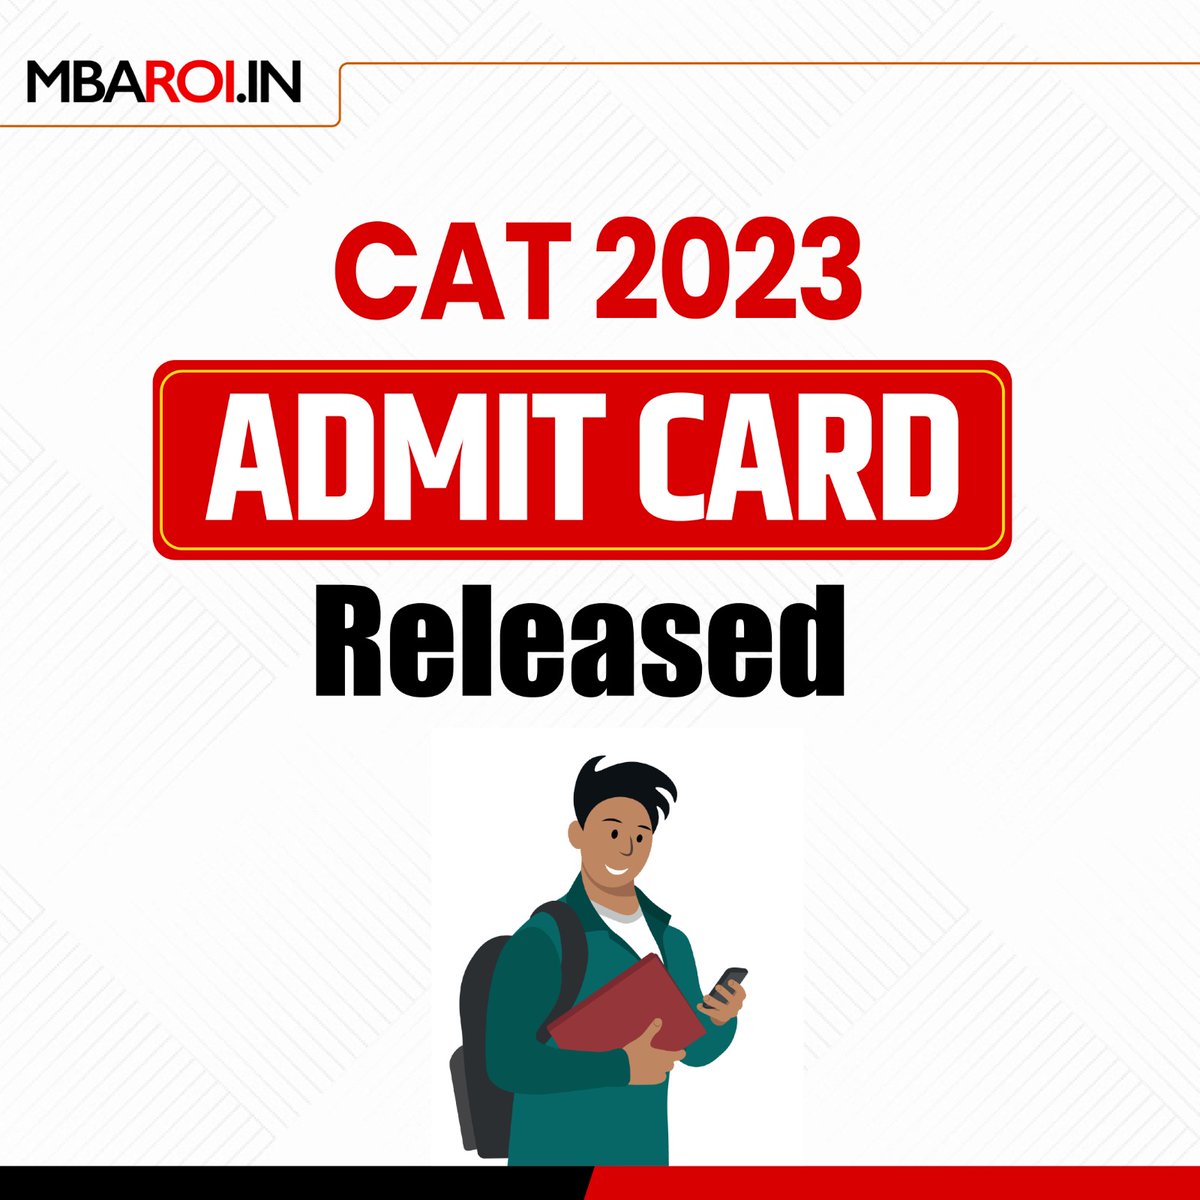 Admit cards or hall tickets of the Common Eligibility Test (CAT) released on Tuesday, November 7. #IIM Lucknow, the organizing institute of the exam this year, released the #CAT2023 admit cards #catadmitcard #cat23 #mbalife #catprepration #mba #CATAdmitCard #CATExam #MBAROI